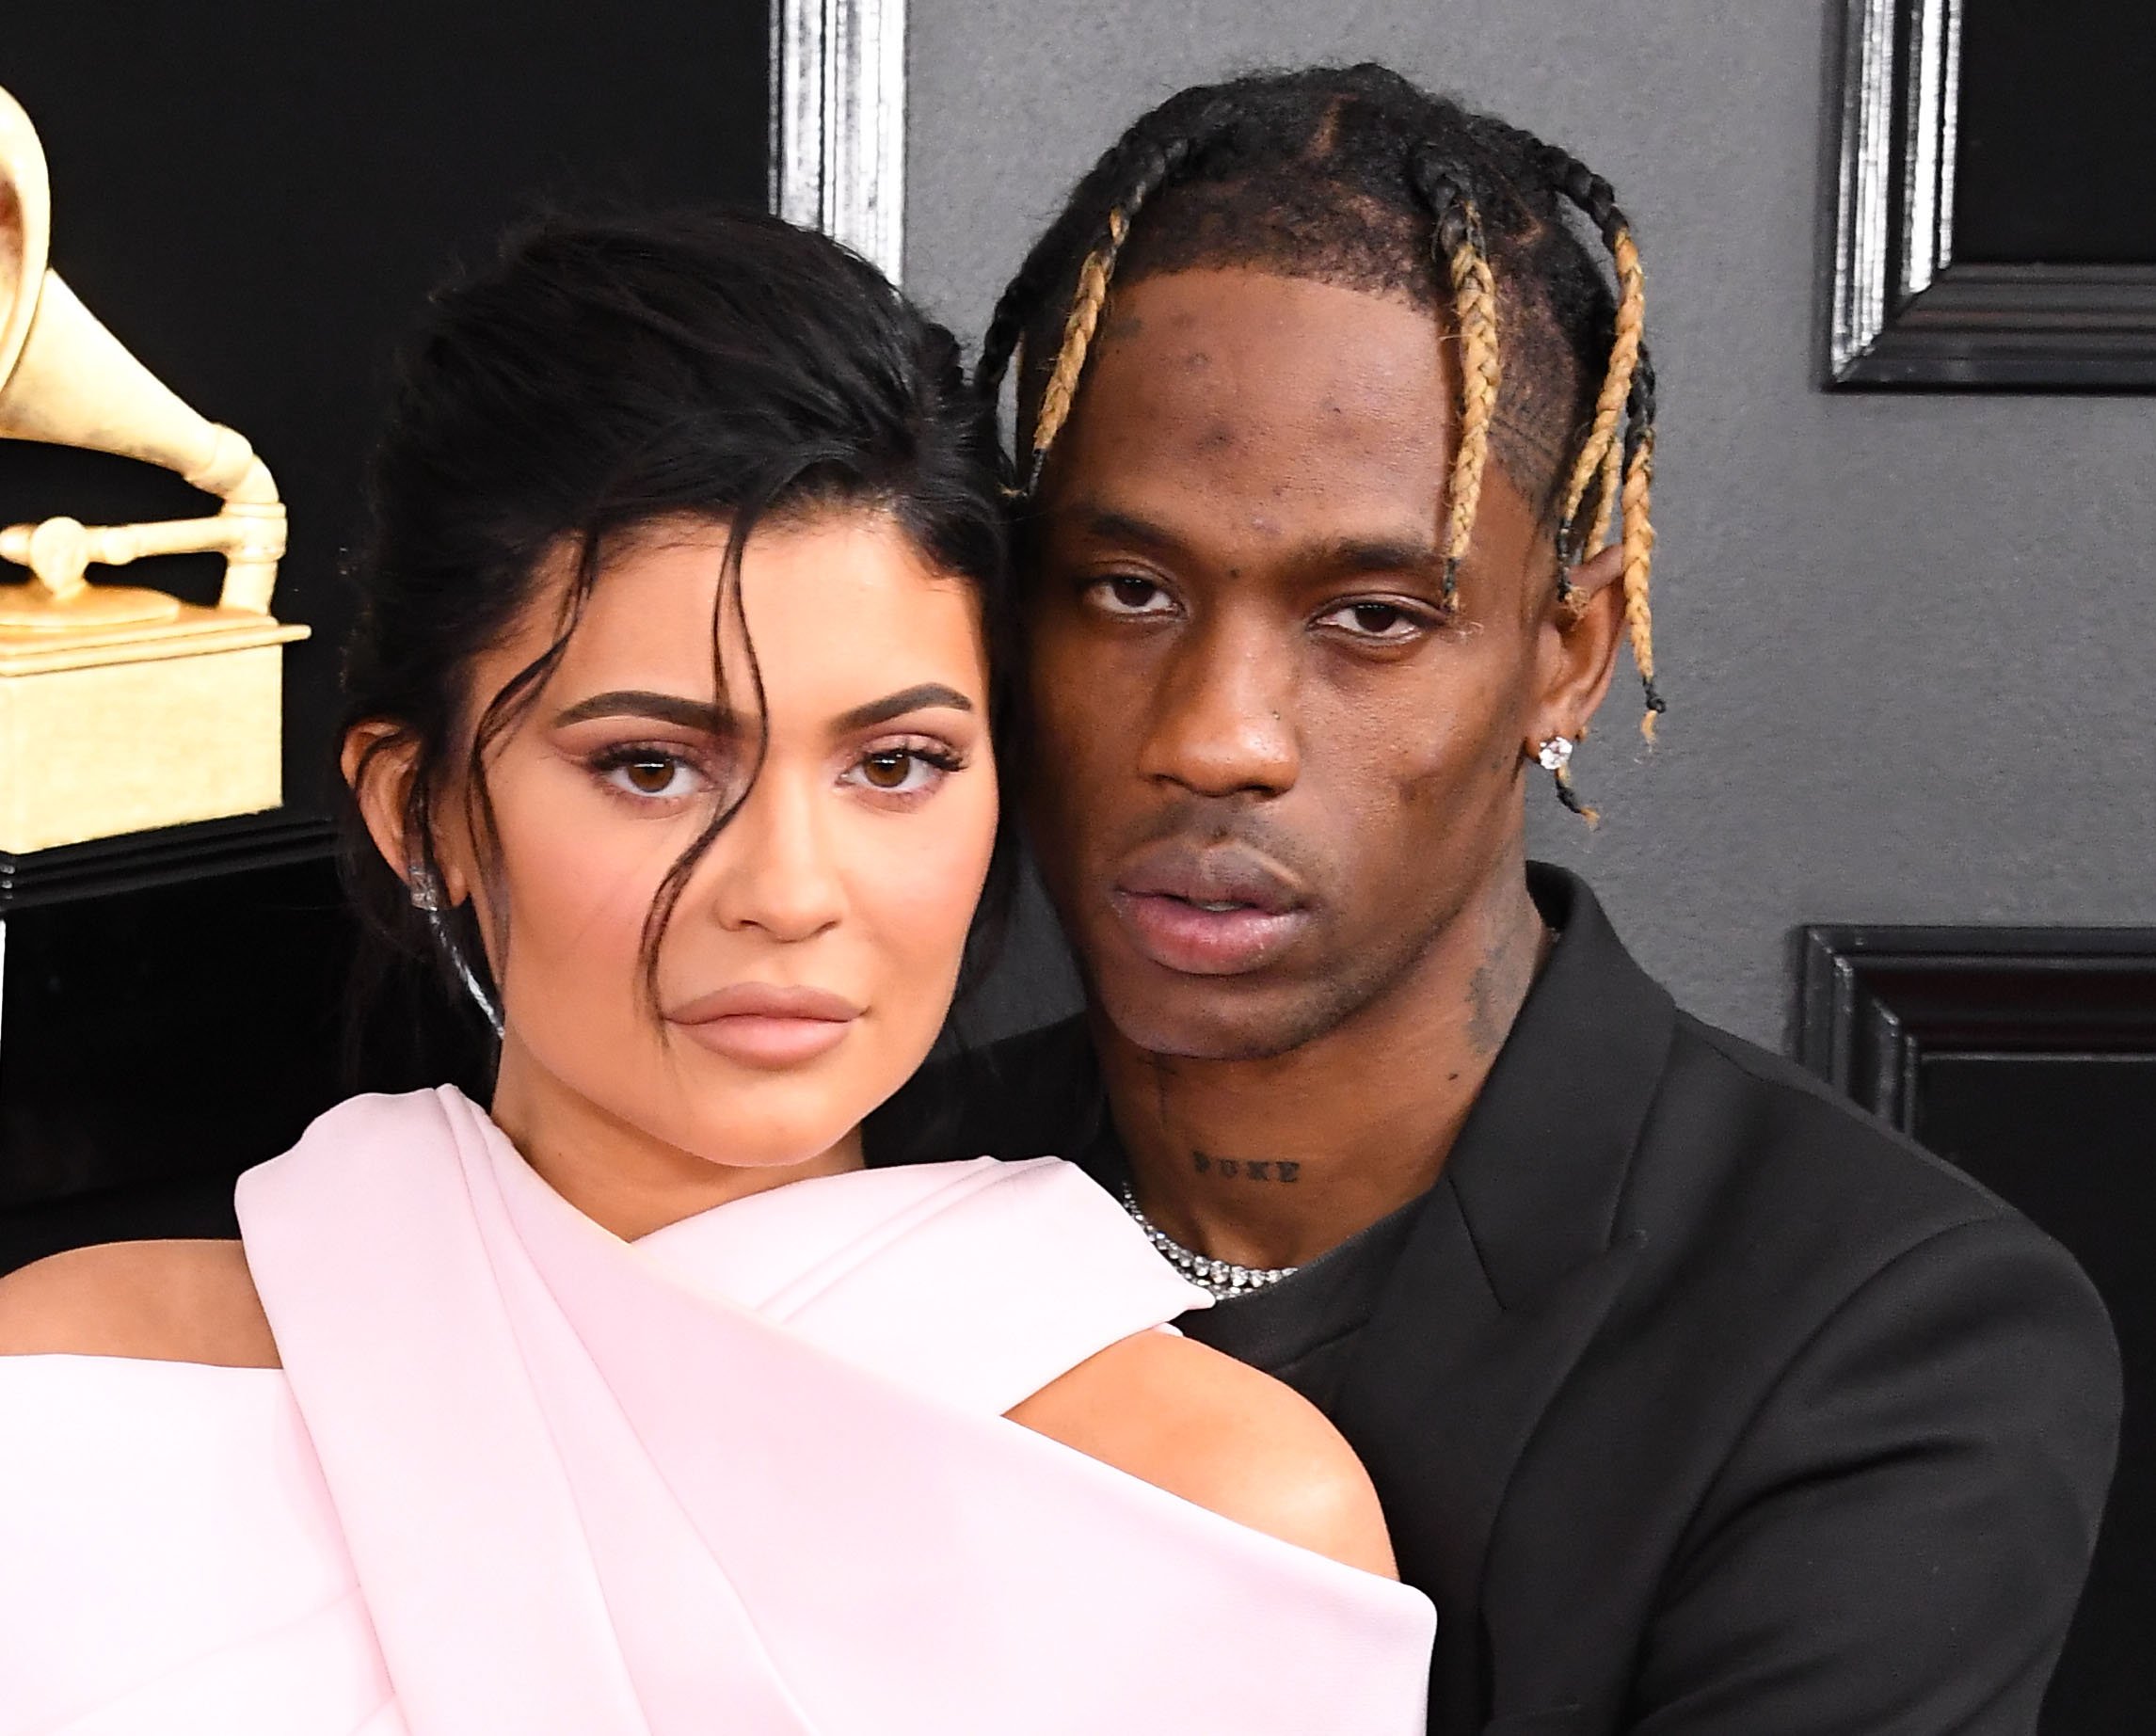 The Expensive Way Kylie Jenner and Travis Scott Made up After a ‘Little Fight’